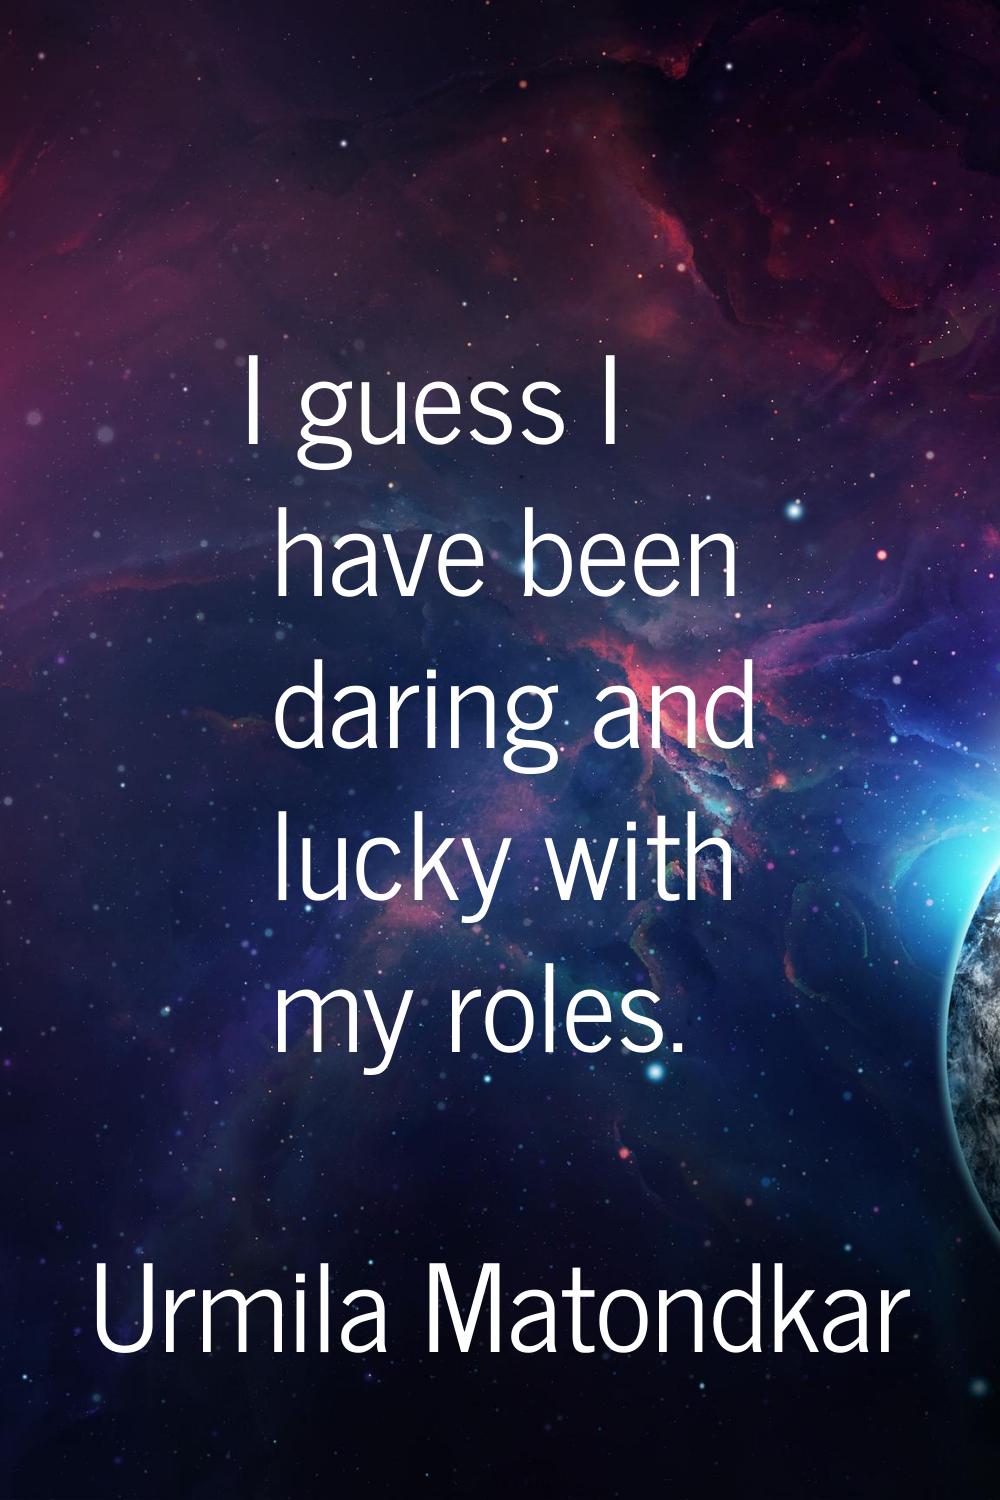 I guess I have been daring and lucky with my roles.